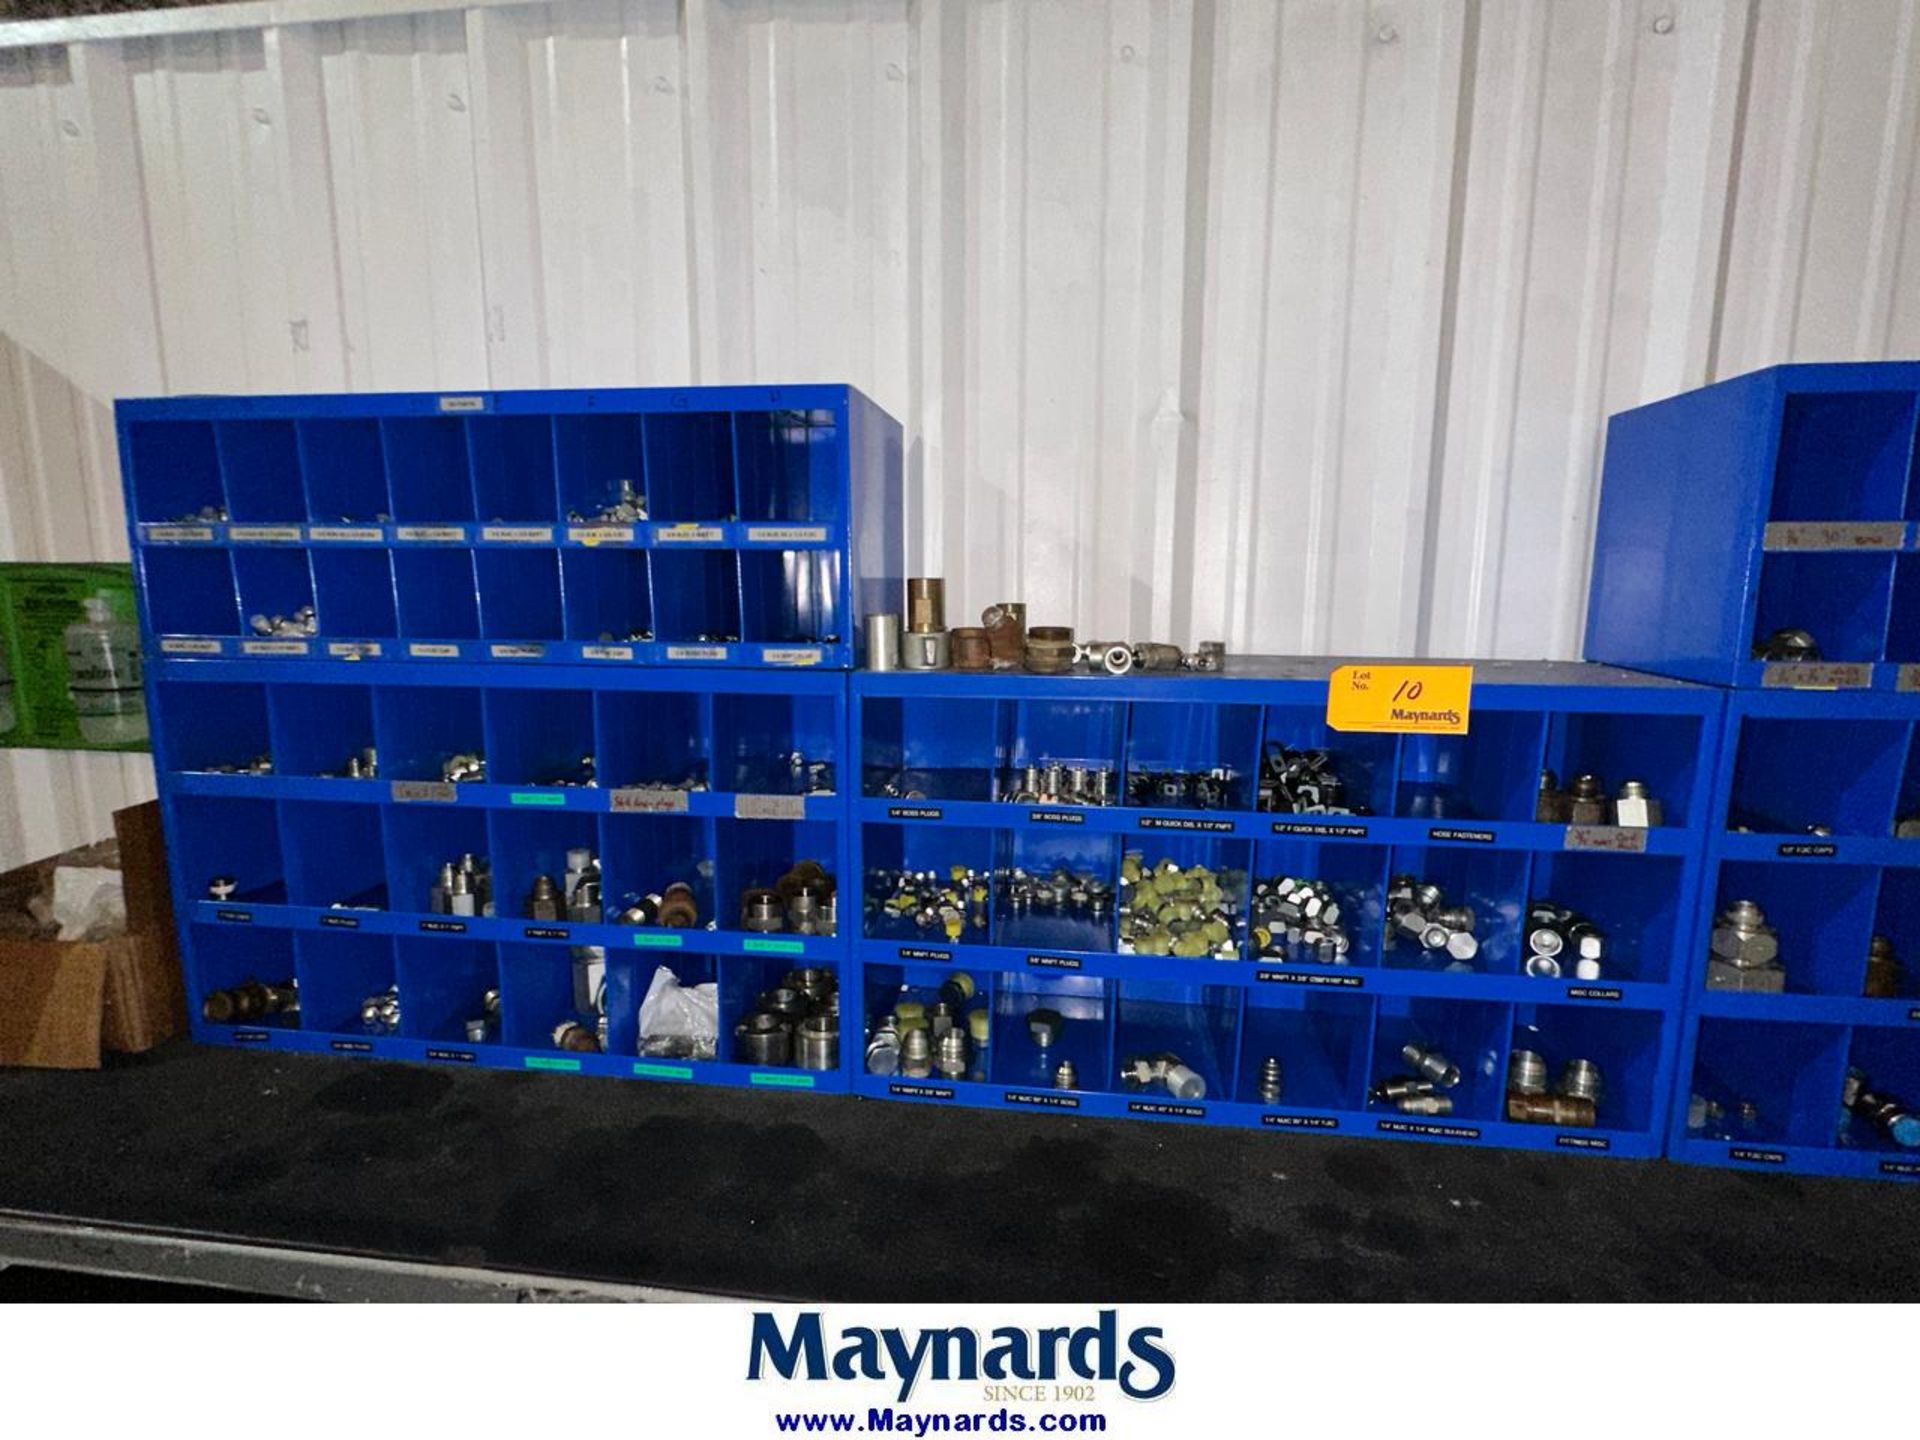 Lot of Fittings, Steel Tables, Shelving, Misc. Bolts and Bins - Image 7 of 7